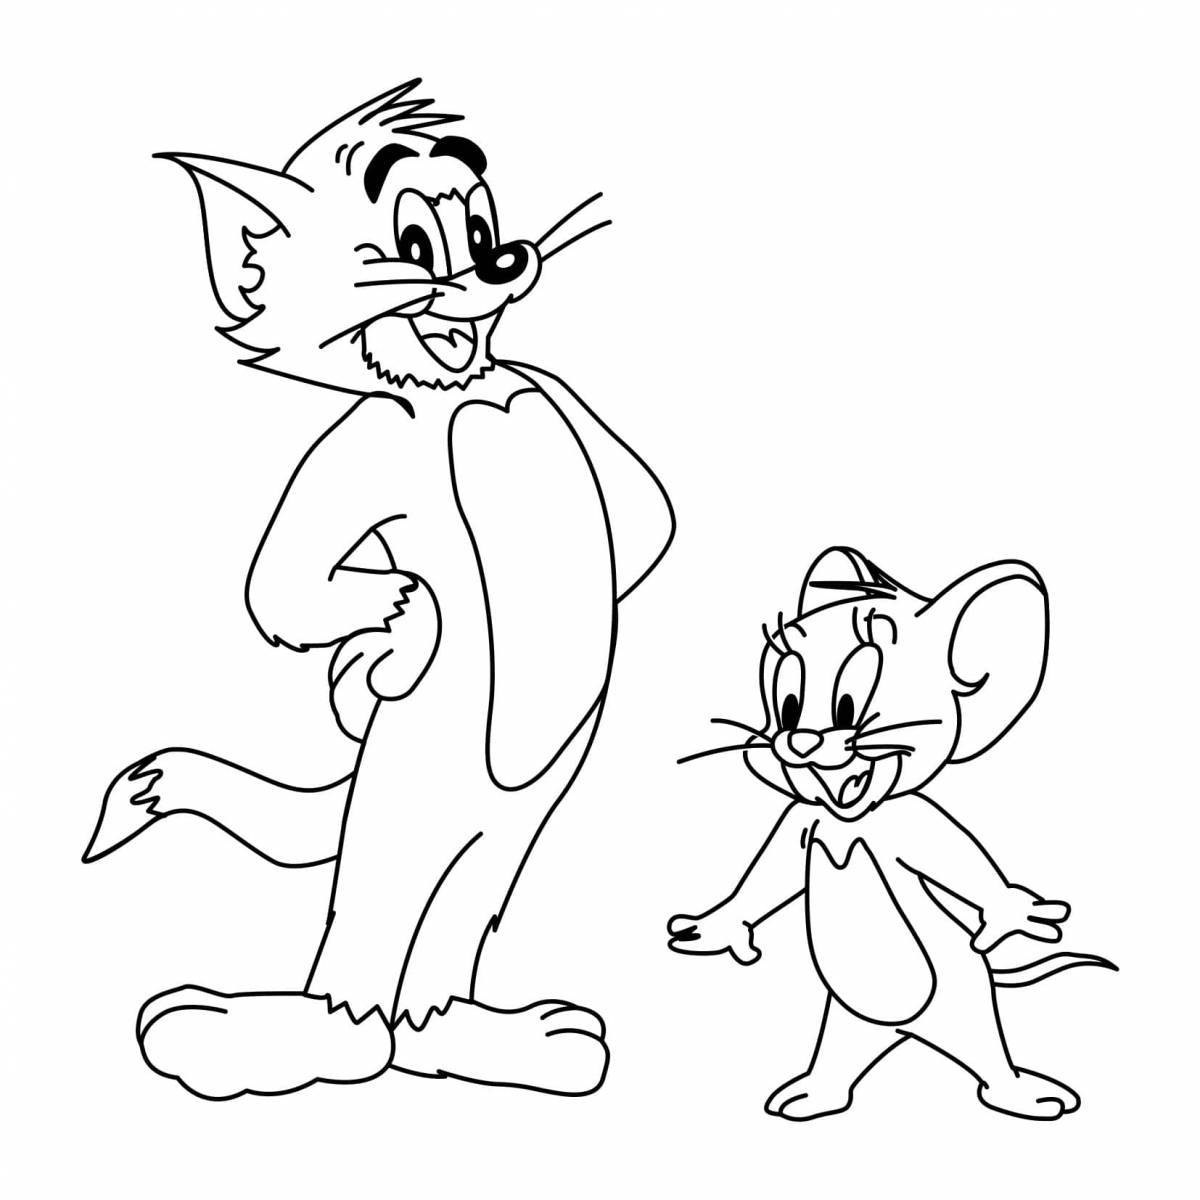 Great tom and jerry coloring book for kids